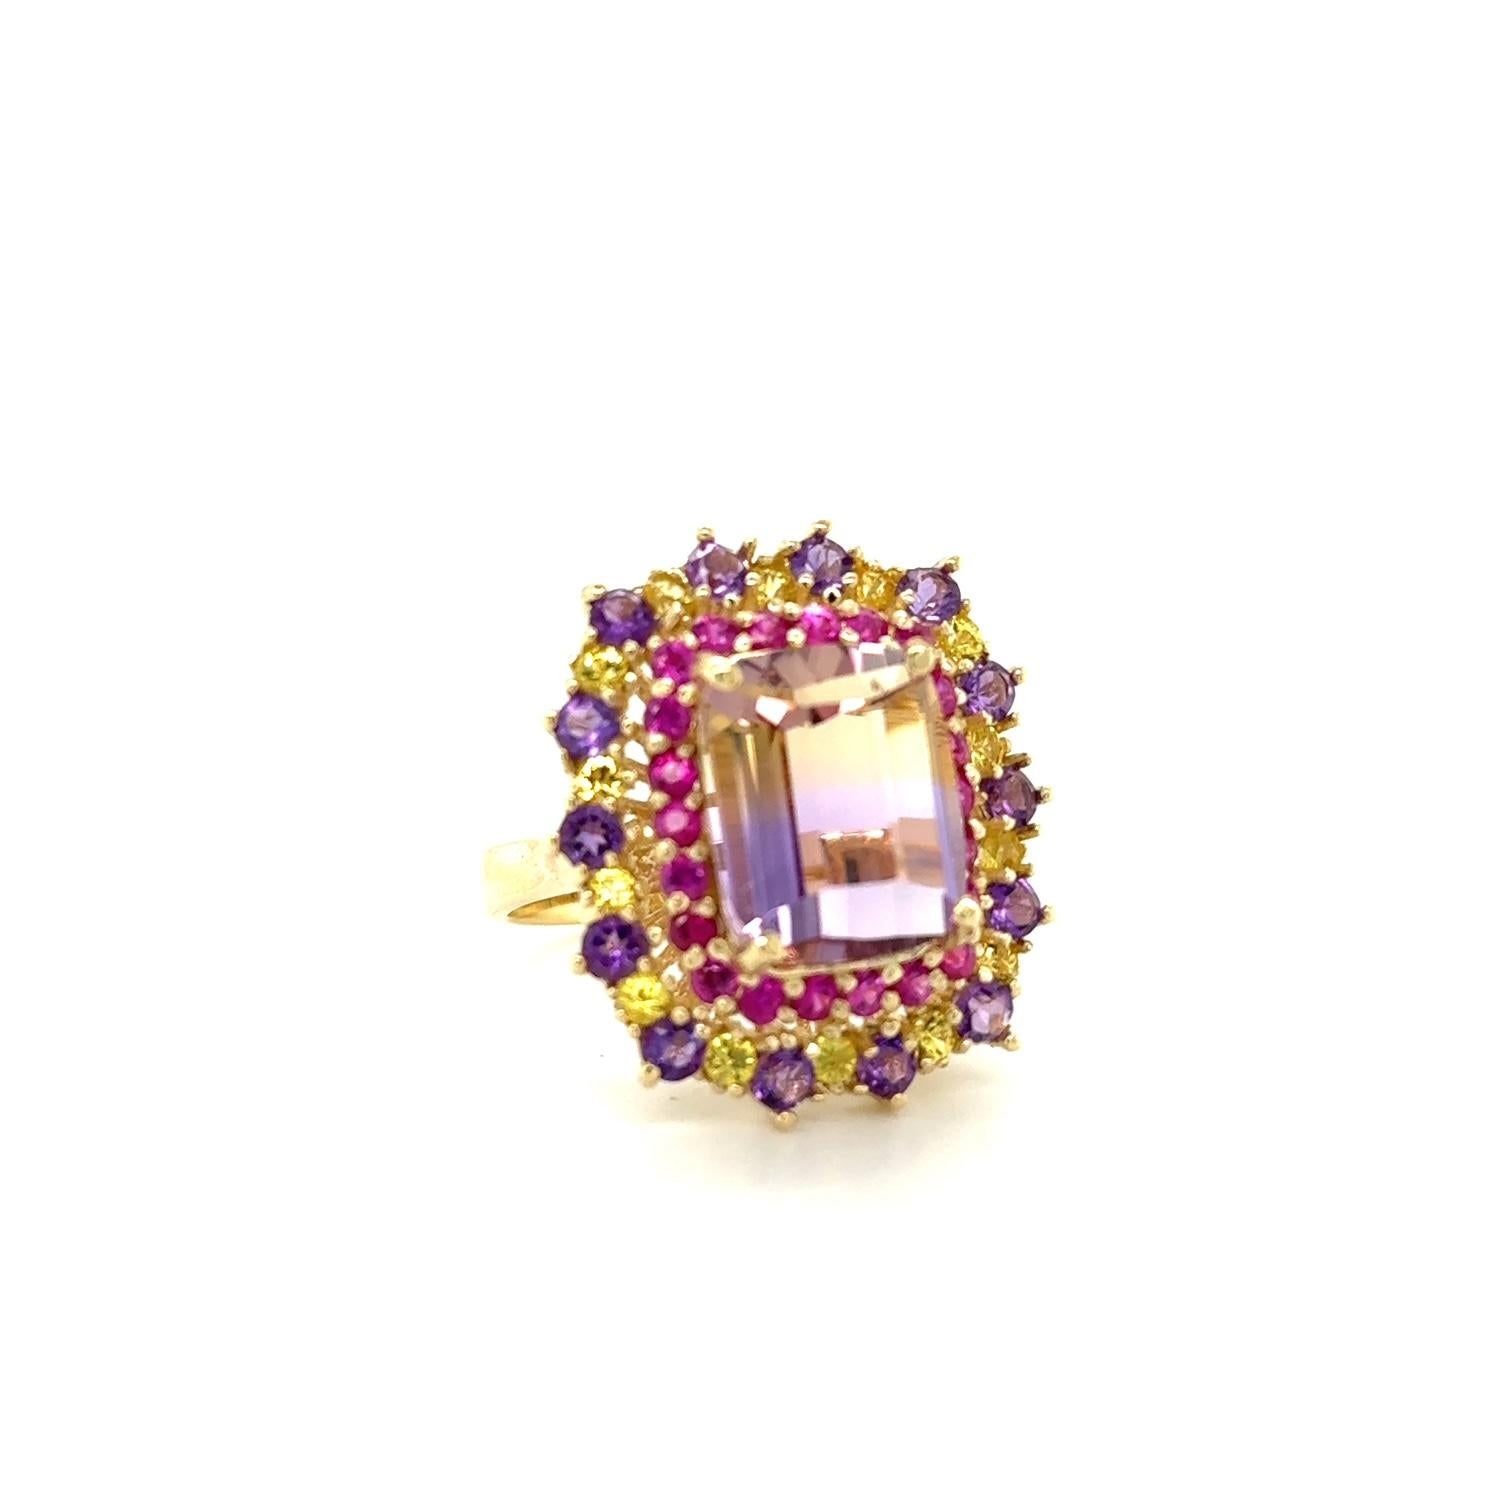 7.88 Carat Ametrine Sapphire Diamond Yellow Gold Cocktail Ring

This ring definitely has a WOW factor!  
Flashing a vivid color of yellow and purple the vibrant Emerald Cut Ametrine sits between Yellow and Pink Sapphires and Diamond accents.  

Item